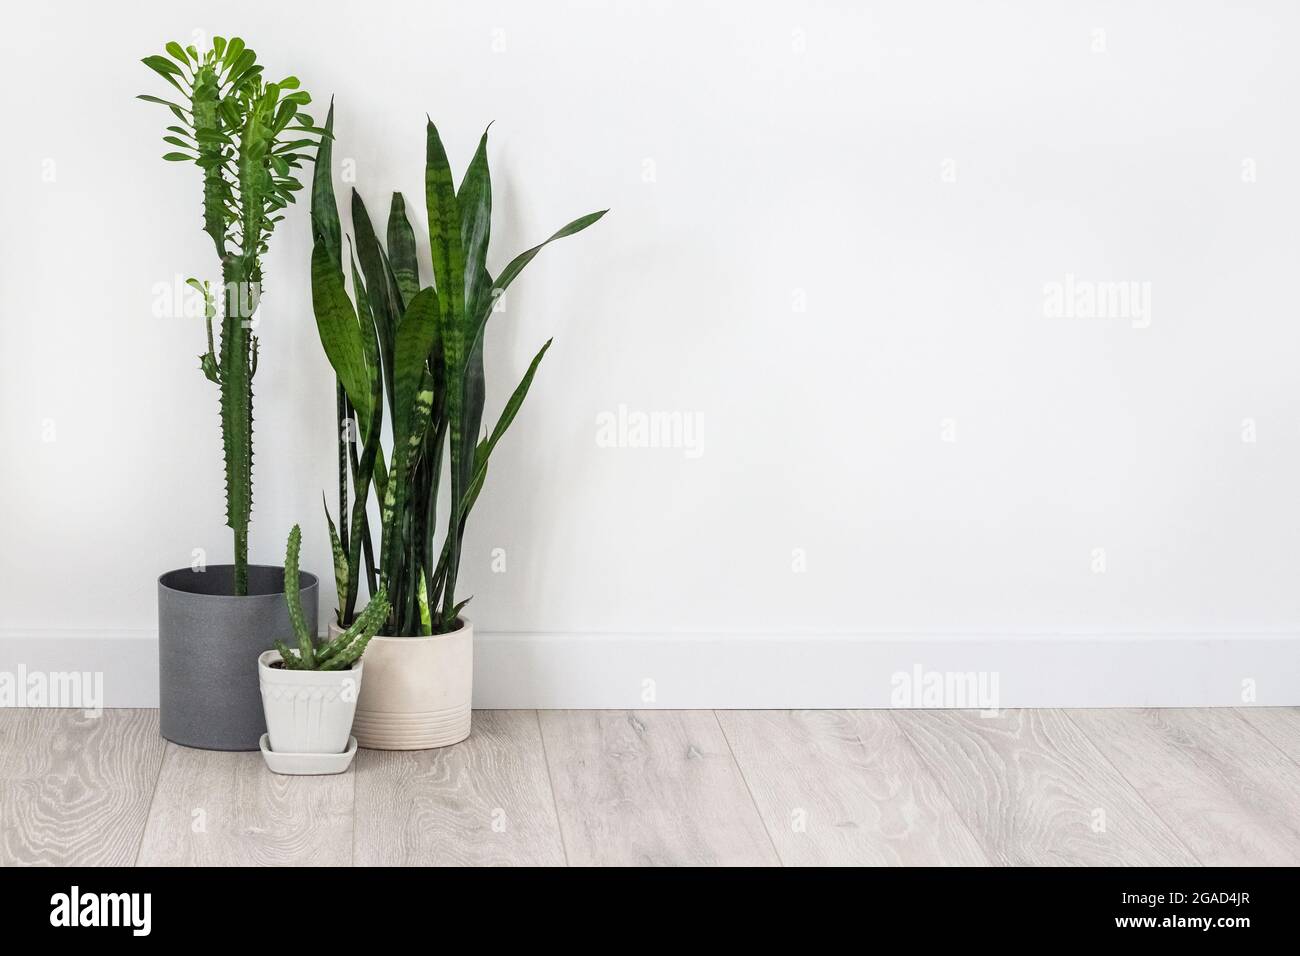 Potted succulents (Euphorbia trigona, Huernia and Sansevieria) staying on the floor on white wall background. Copy space Stock Photo